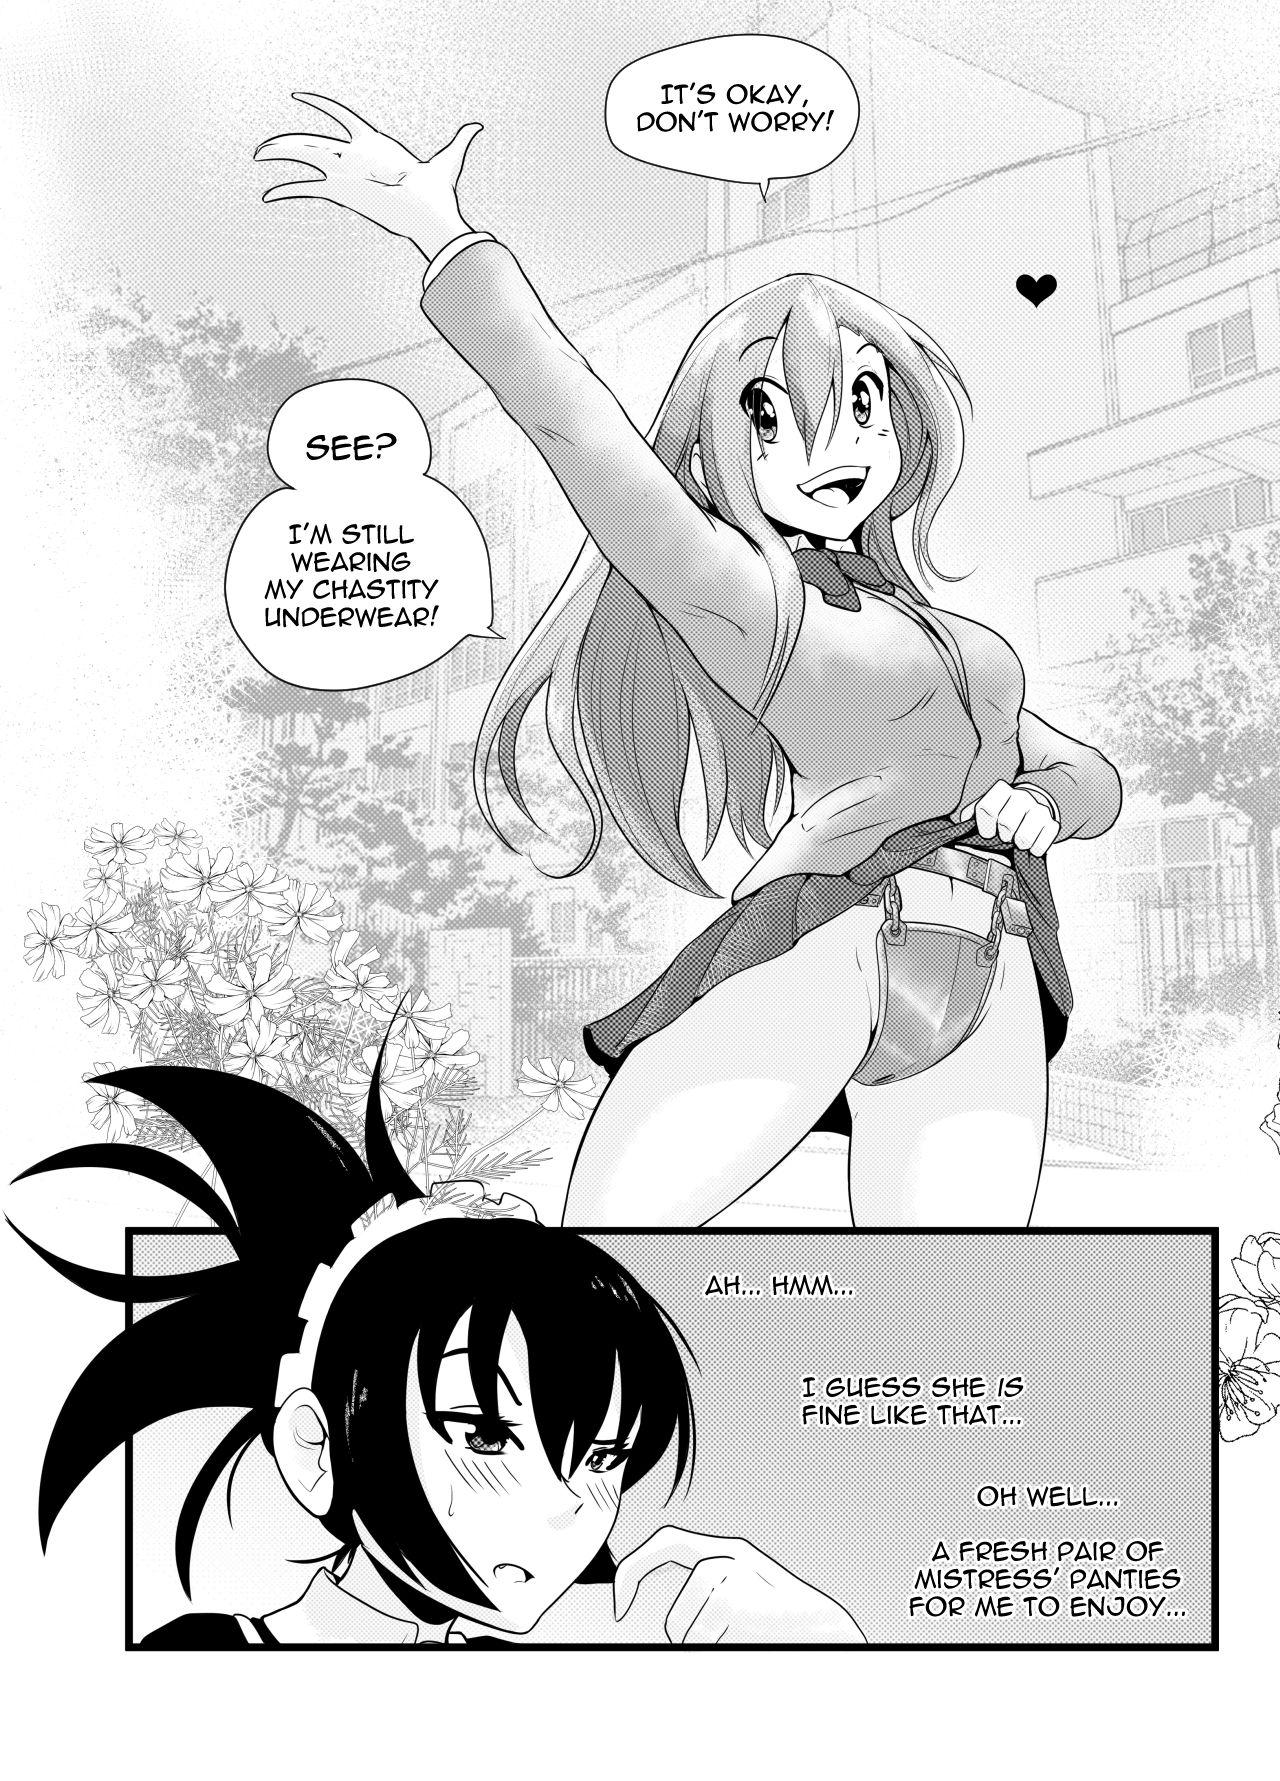 Free Blow Job I Was Caught Masturbating by My Maid and She Locked Me in a Chastity Belt! - Seitokai yakuindomo Special Locations - Page 12